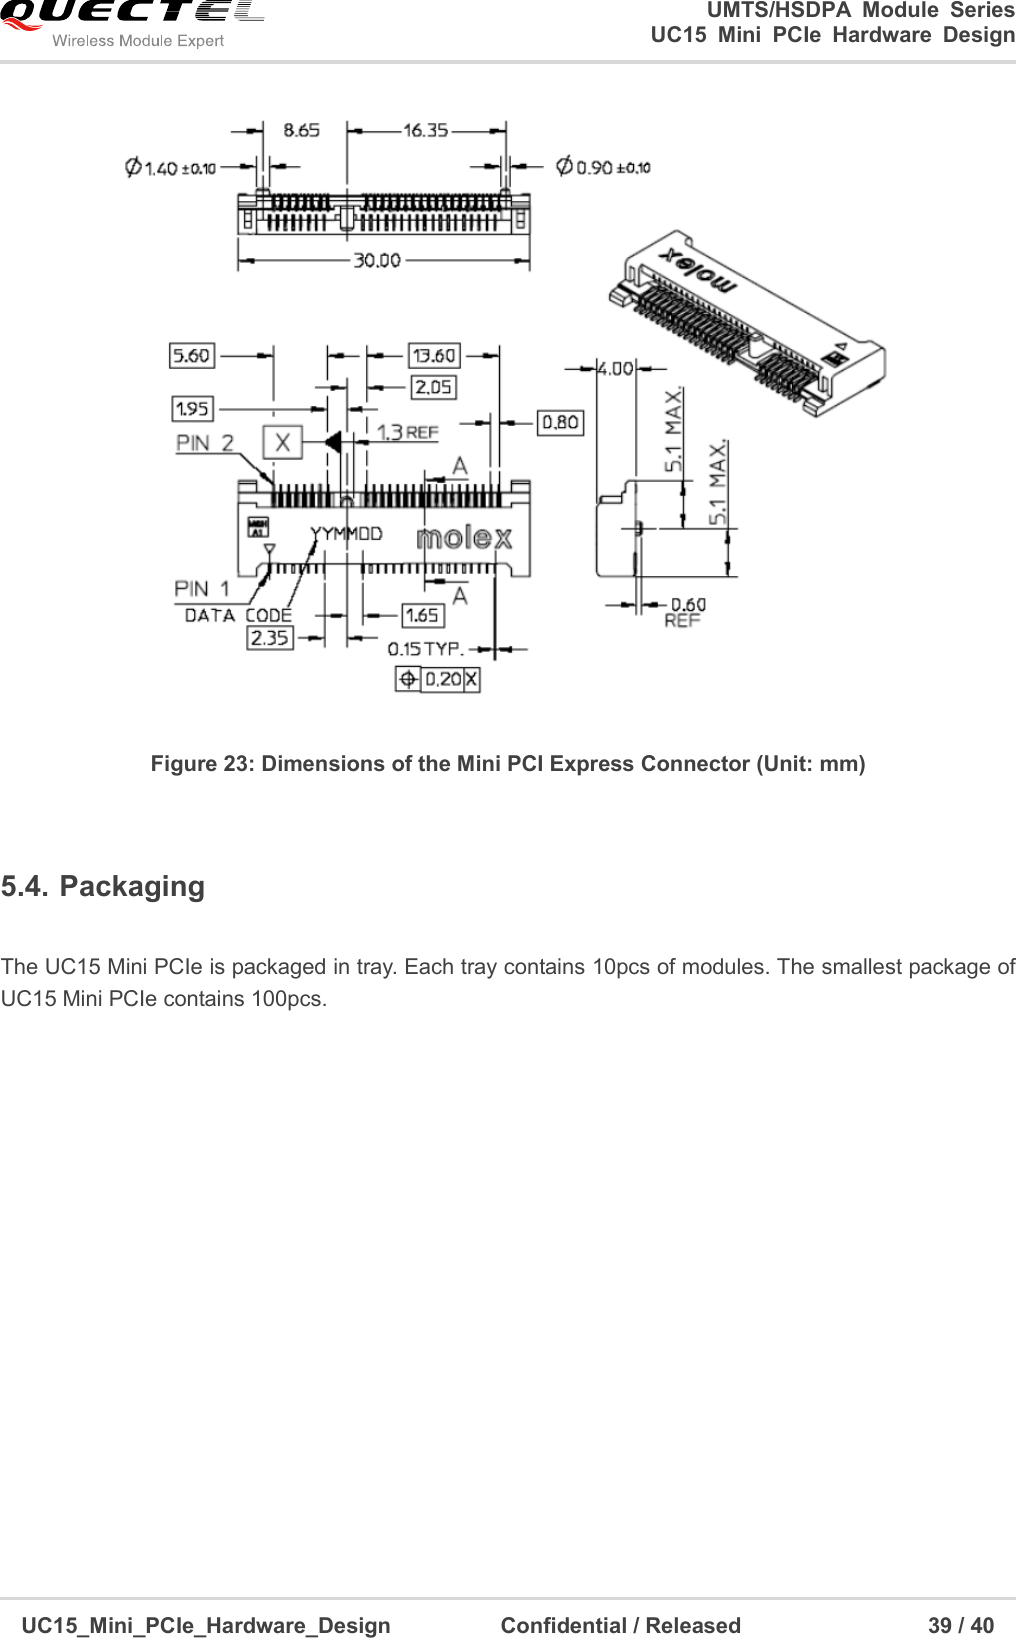                                                                        UMTS/HSDPA  Module  Series                                                          UC15 Mini PCIe Hardware Design  UC15_Mini_PCIe_Hardware_Design                    Confidential / Released                                  39 / 40     Figure 23: Dimensions of the Mini PCI Express Connector (Unit: mm)  5.4. Packaging  The UC15 Mini PCIe is packaged in tray. Each tray contains 10pcs of modules. The smallest package of UC15 Mini PCIe contains 100pcs.